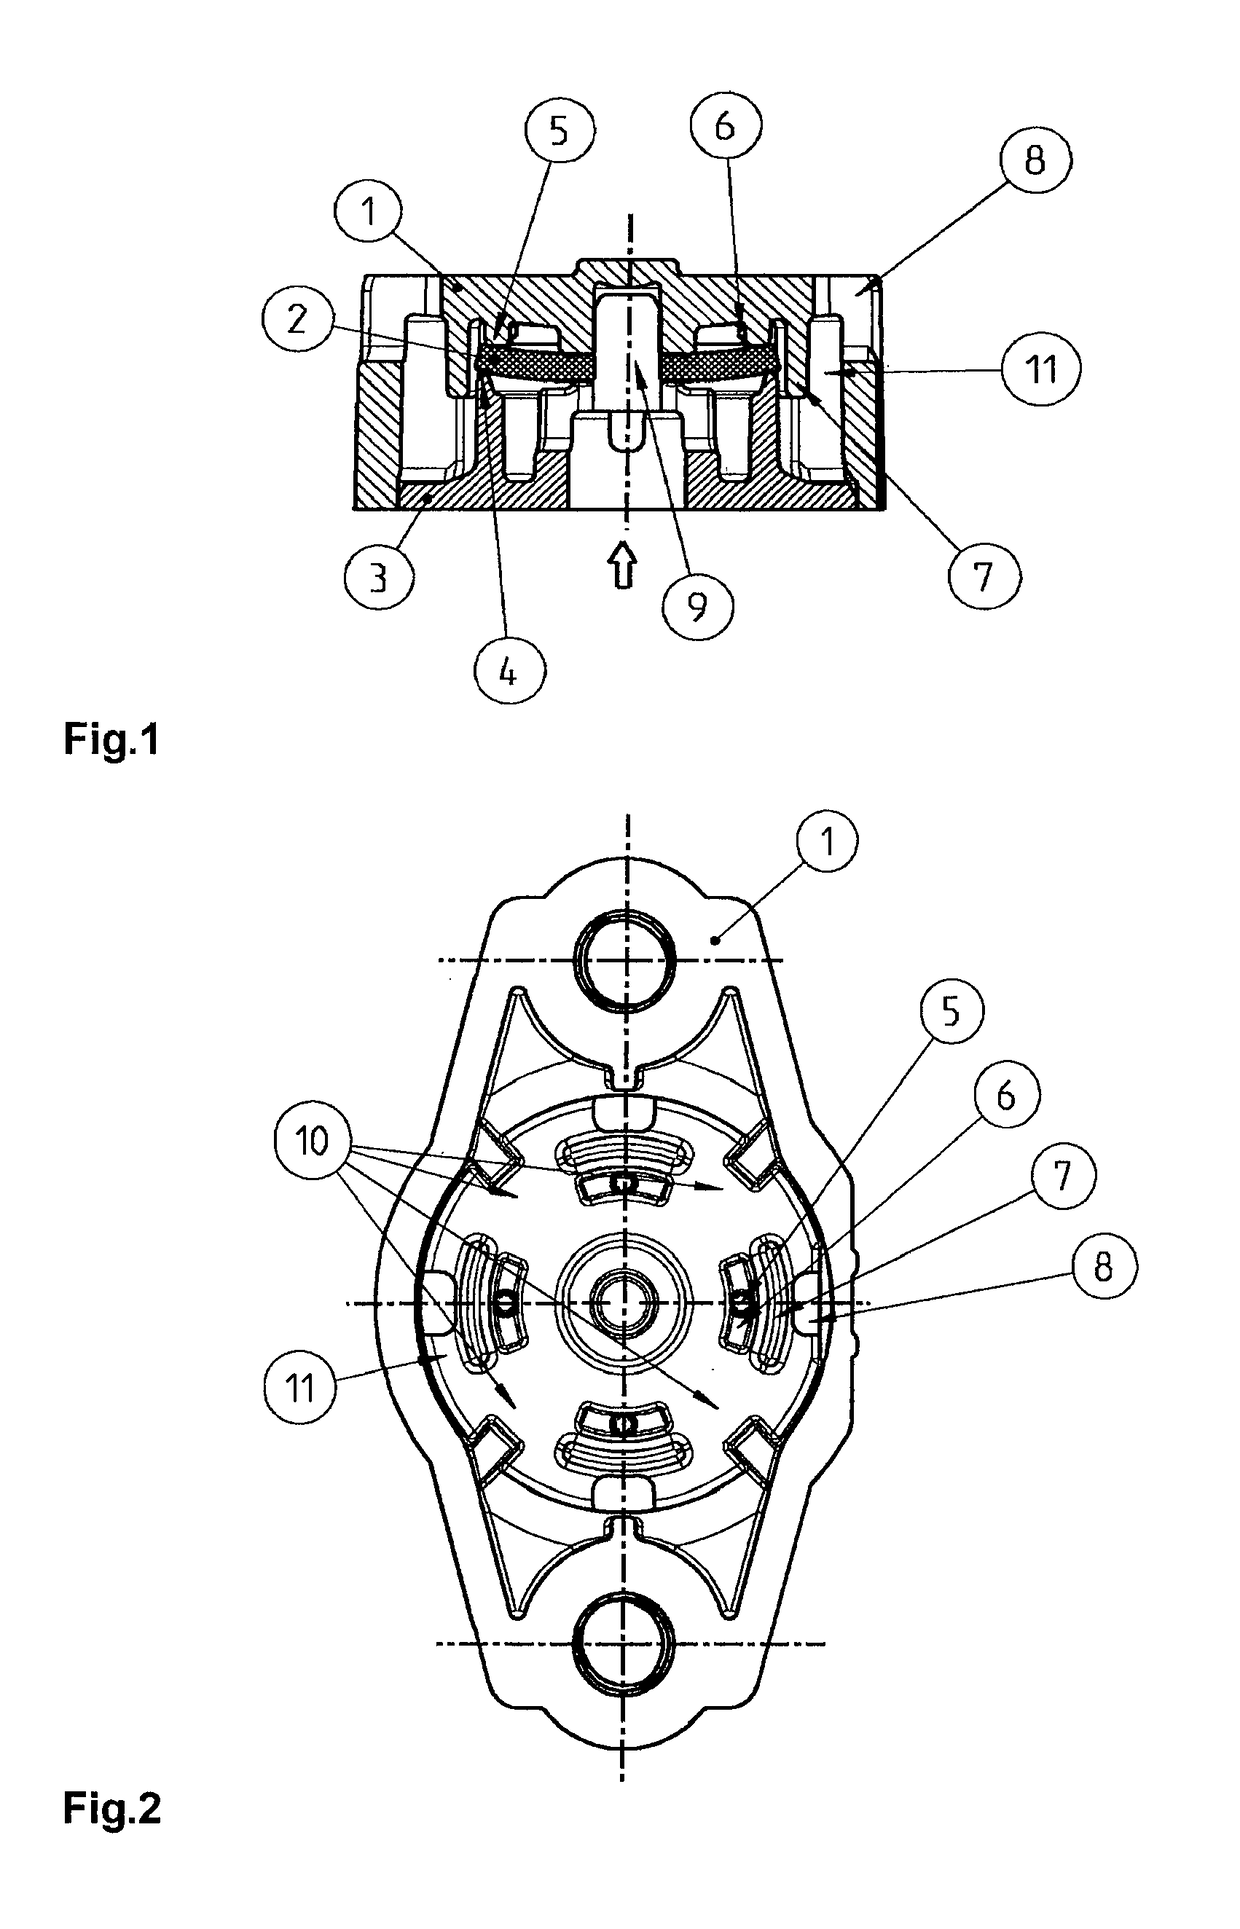 Check valve for ventilation or outlet openings of compressed air apparatuses in vehicles